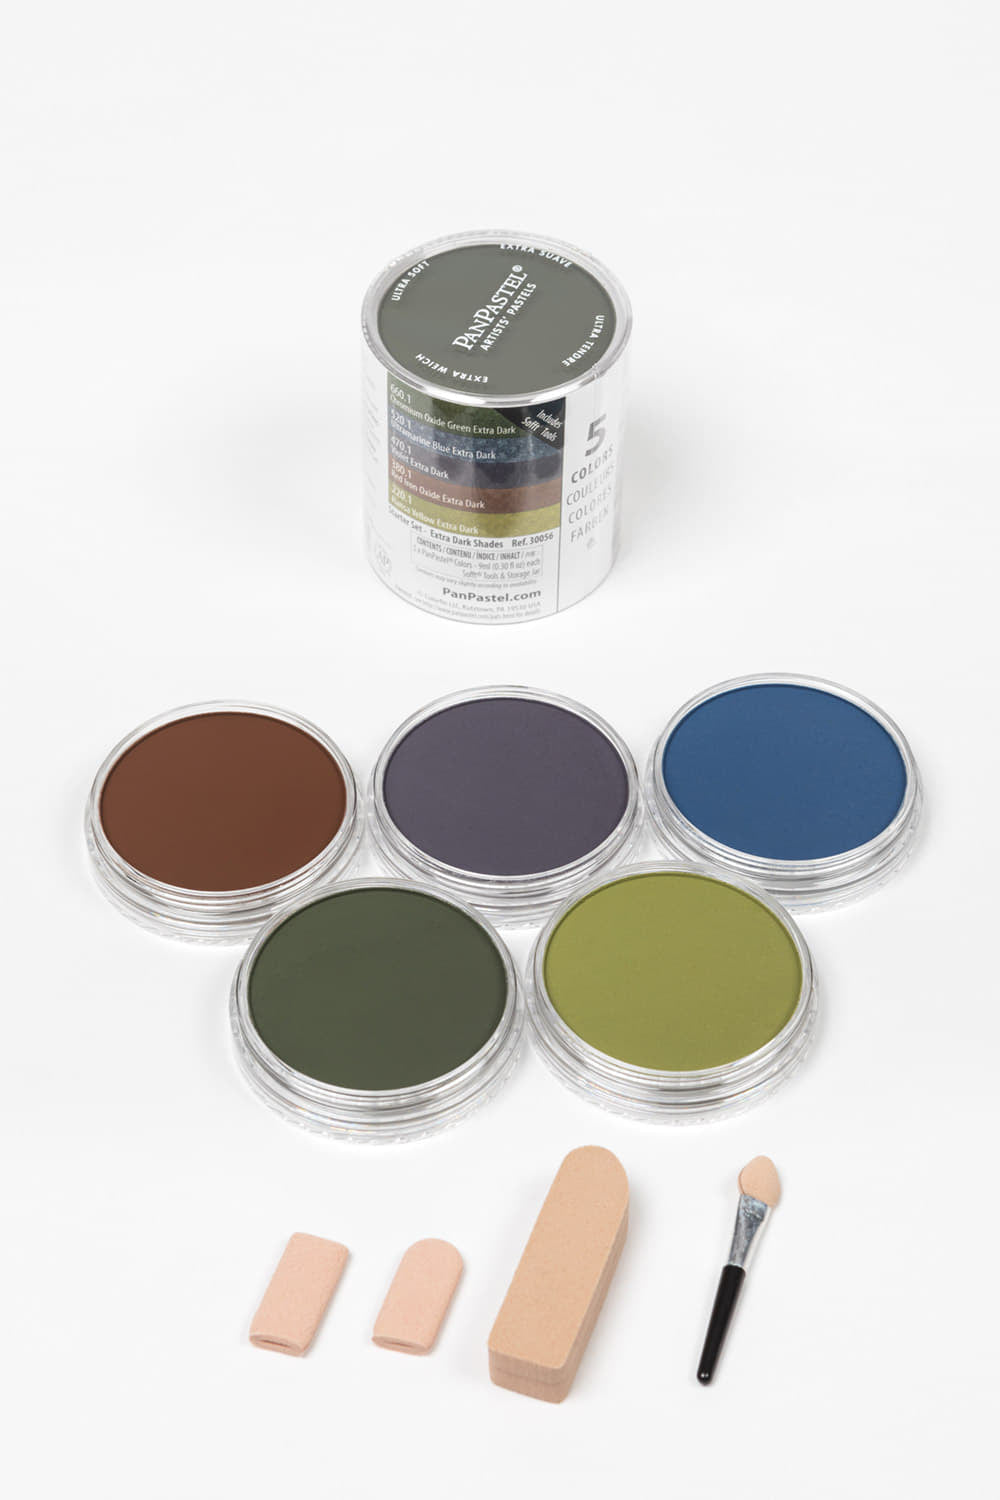 PanPastel Starter Set Extra Dark Shades 30056. This set lends itself well to backgrounds and shades. Includes a selections of Sofft tools application and blending tools.